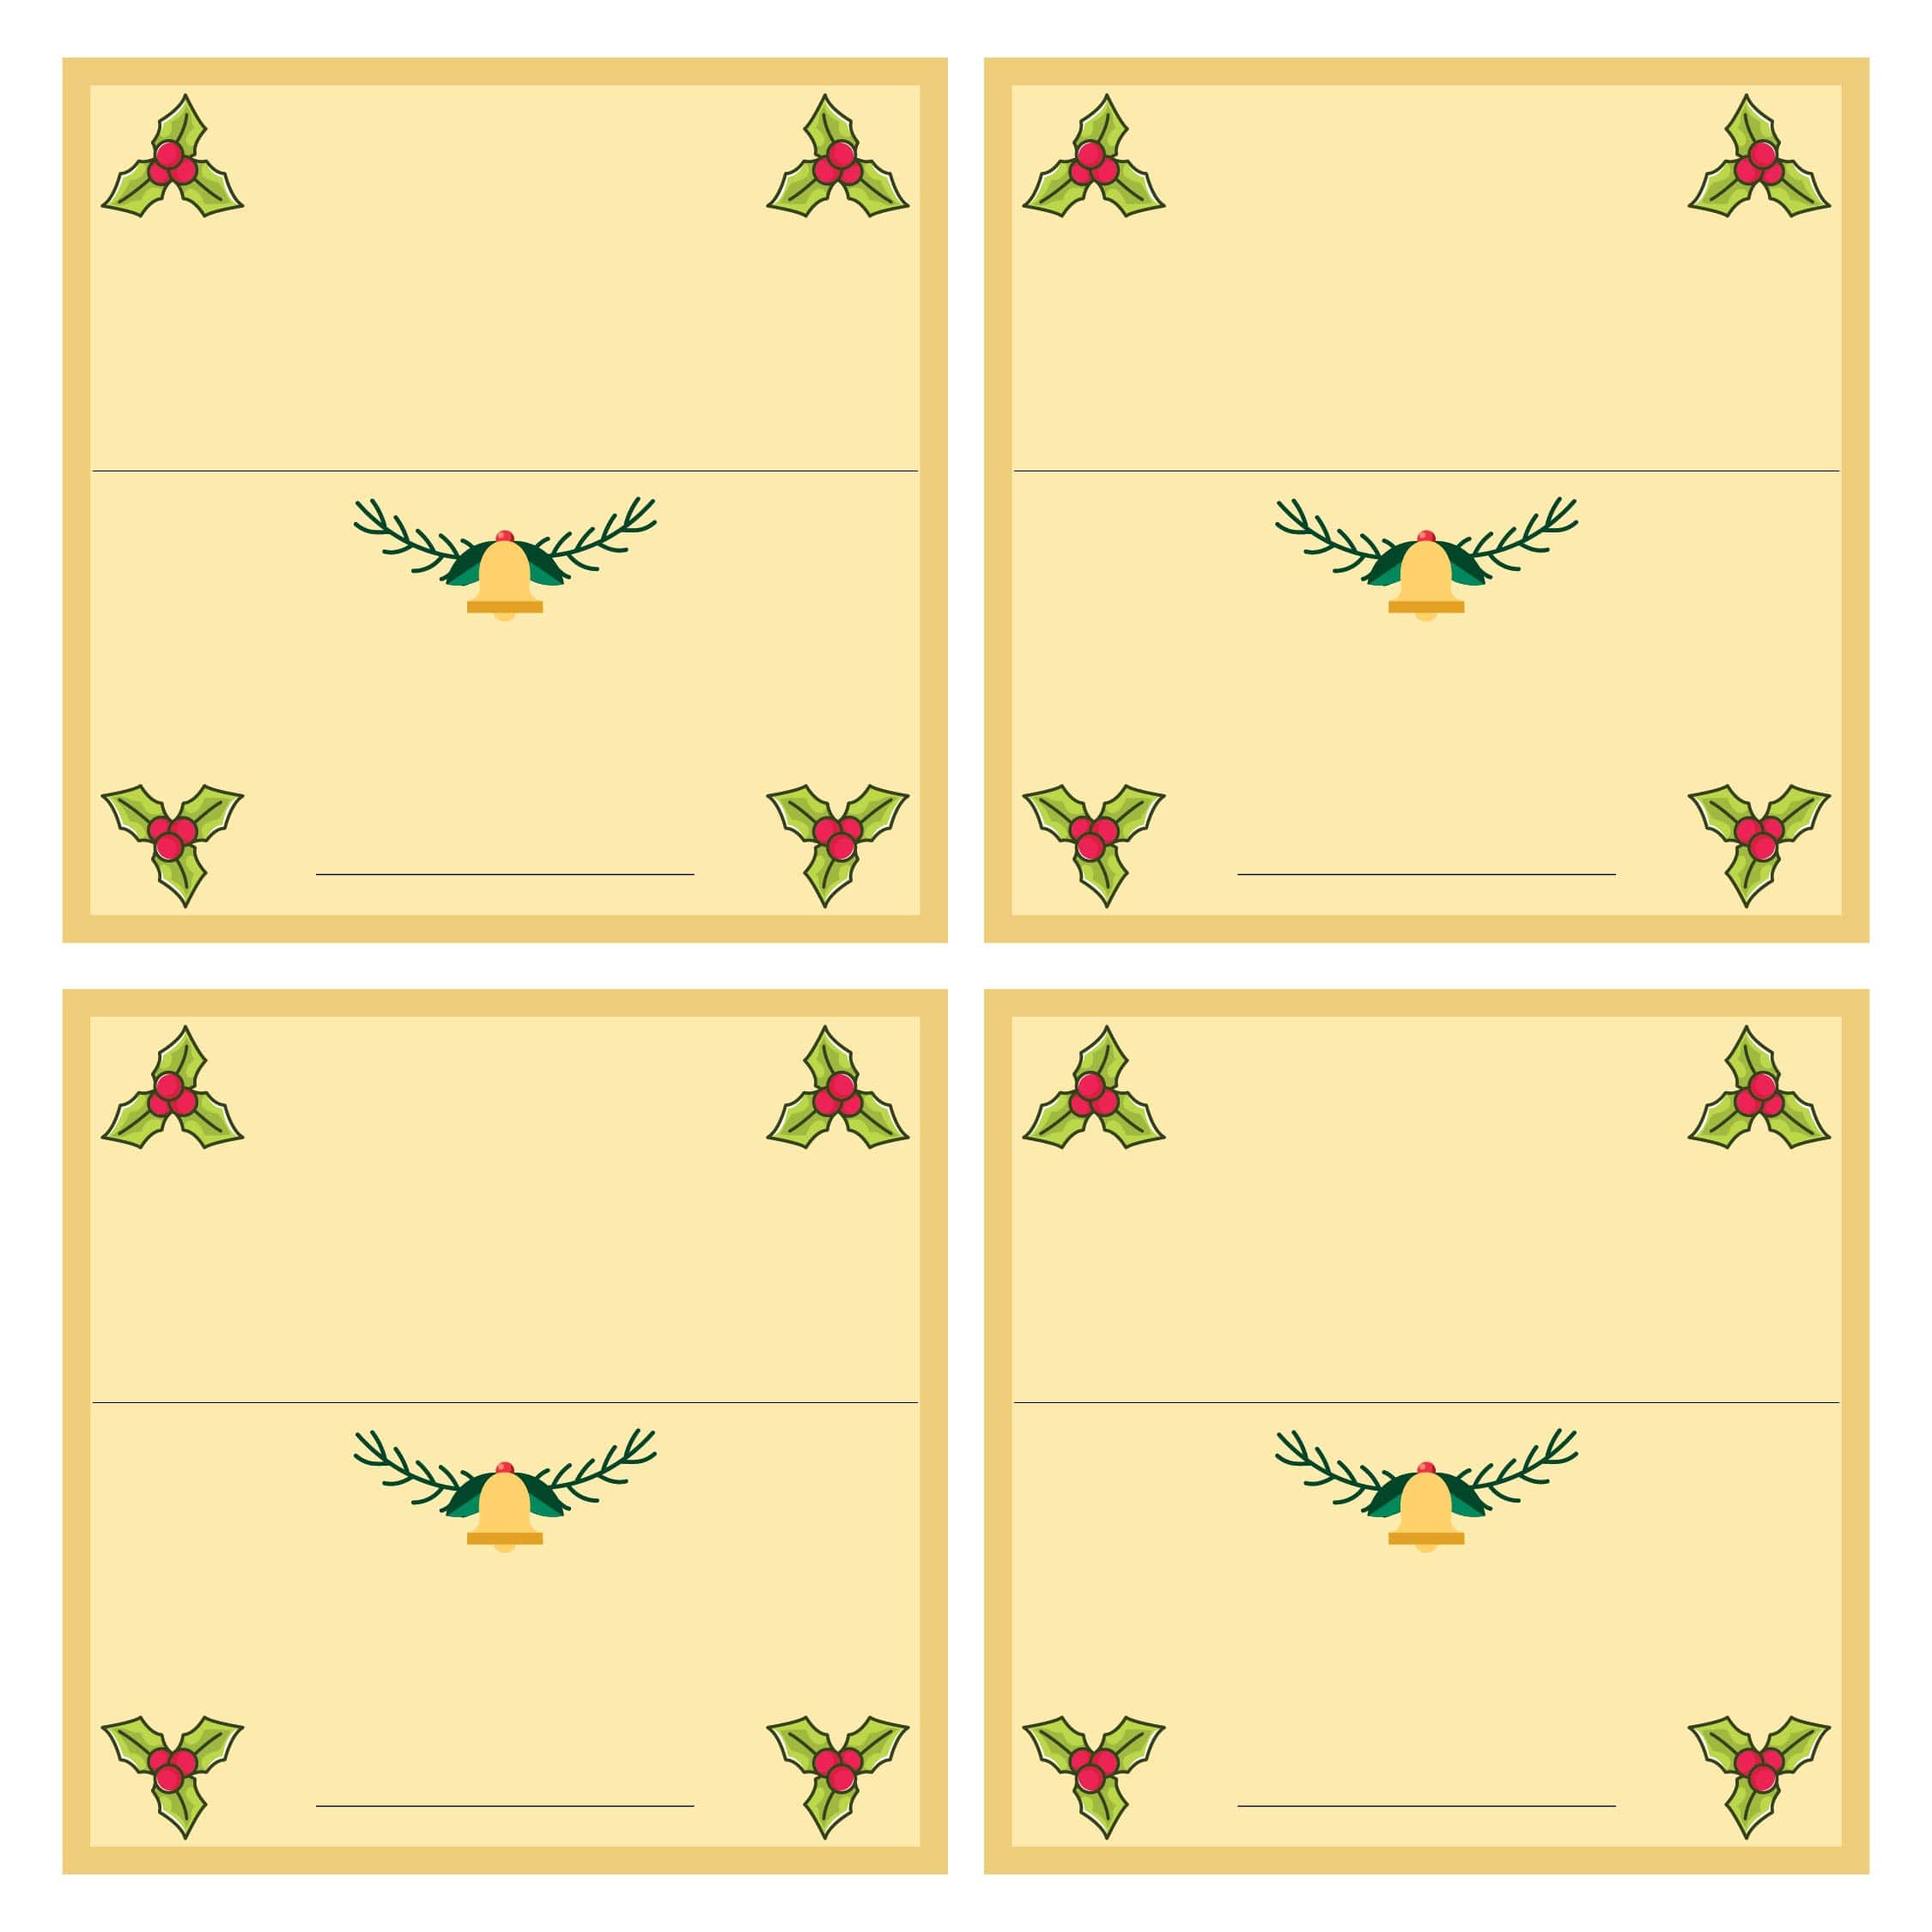 Printable Christmas Place Cards Template_22897